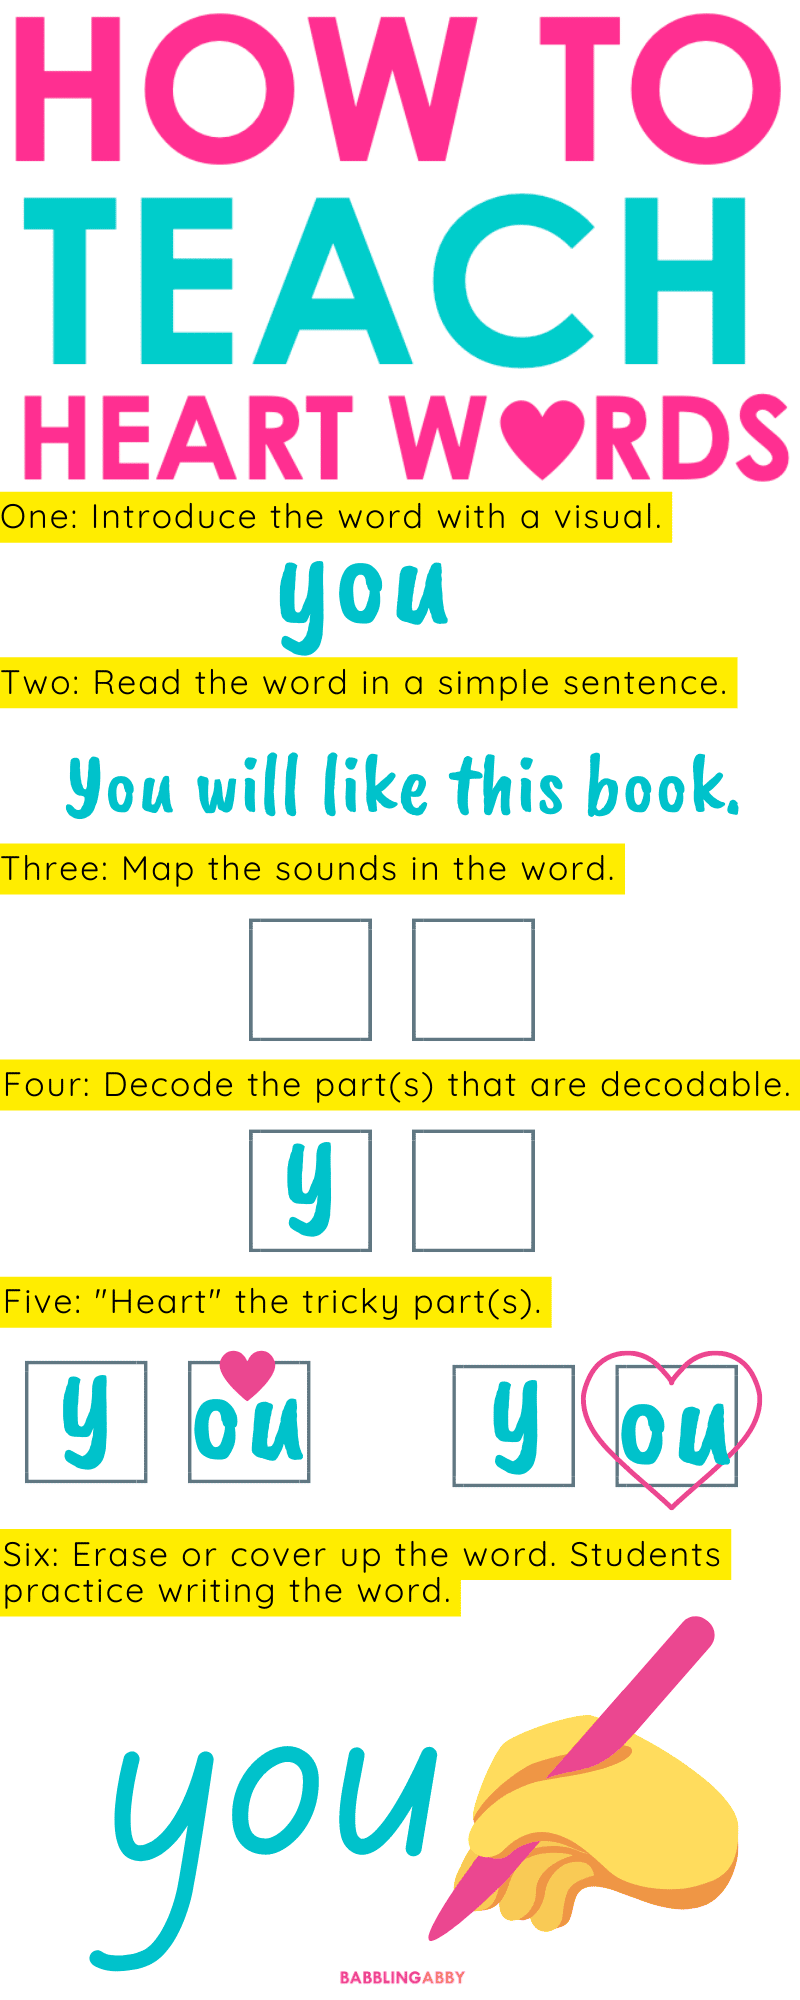 Step by step directions for how to teach using the heart words method.